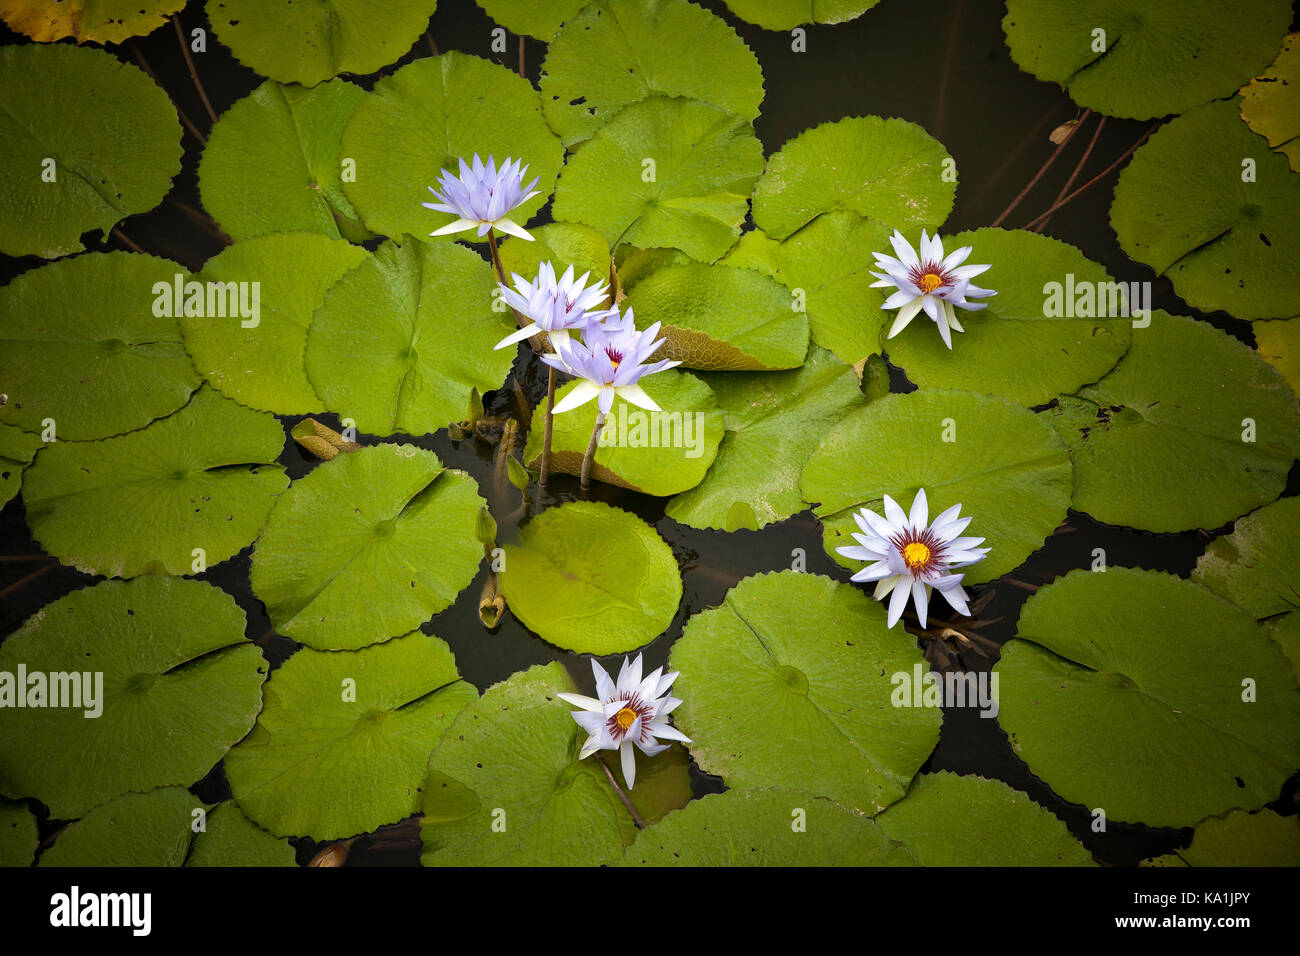 Water lilies, Nymphaea sp. Singapore Stock Photo